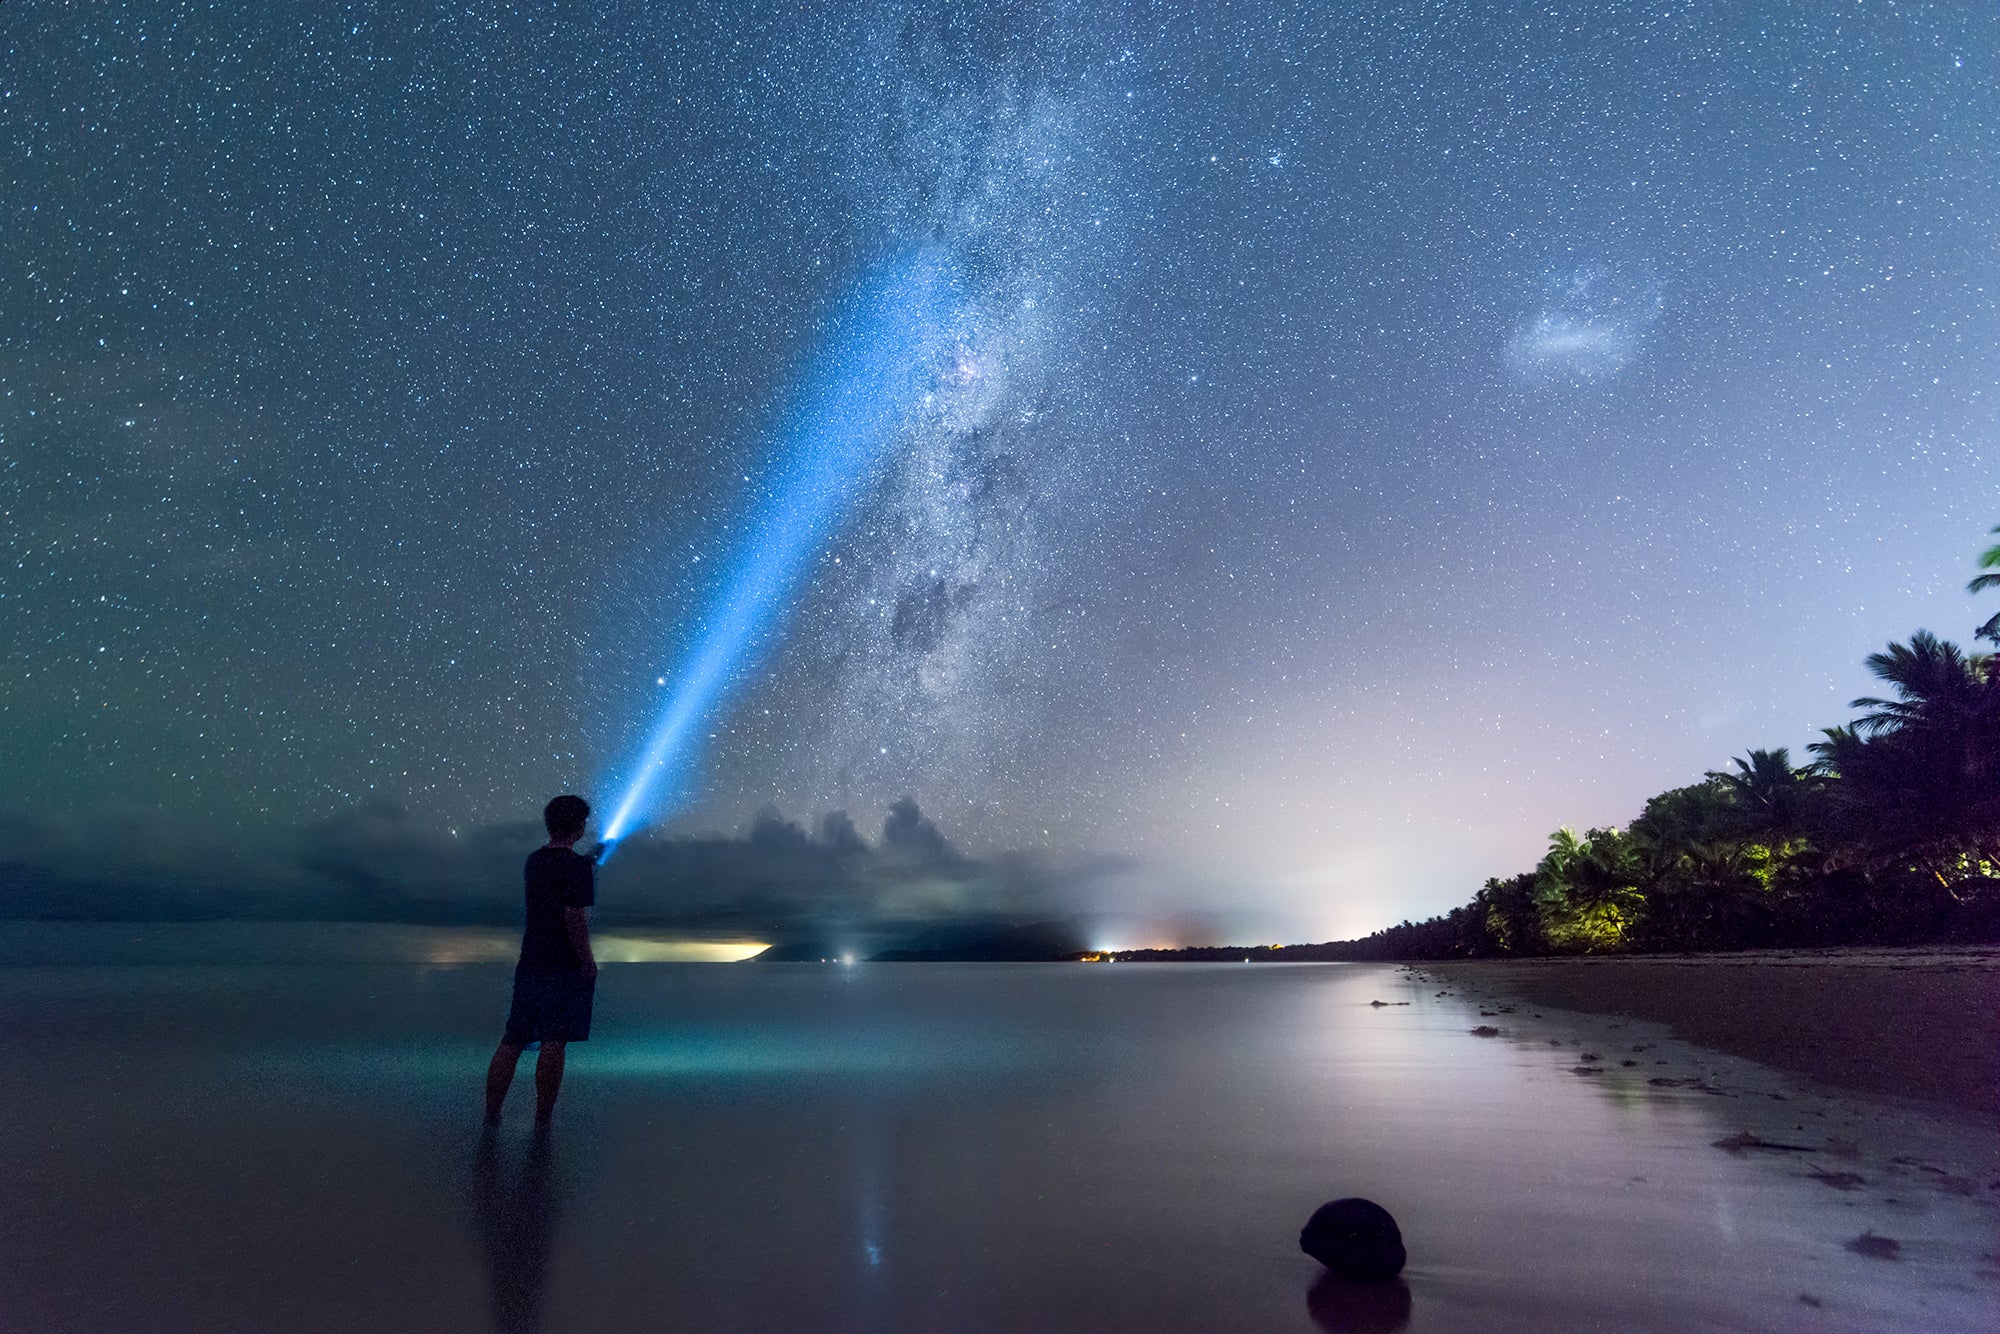 A person holding a flashlight stands on a beach while viewing the Milky Way in the night sky